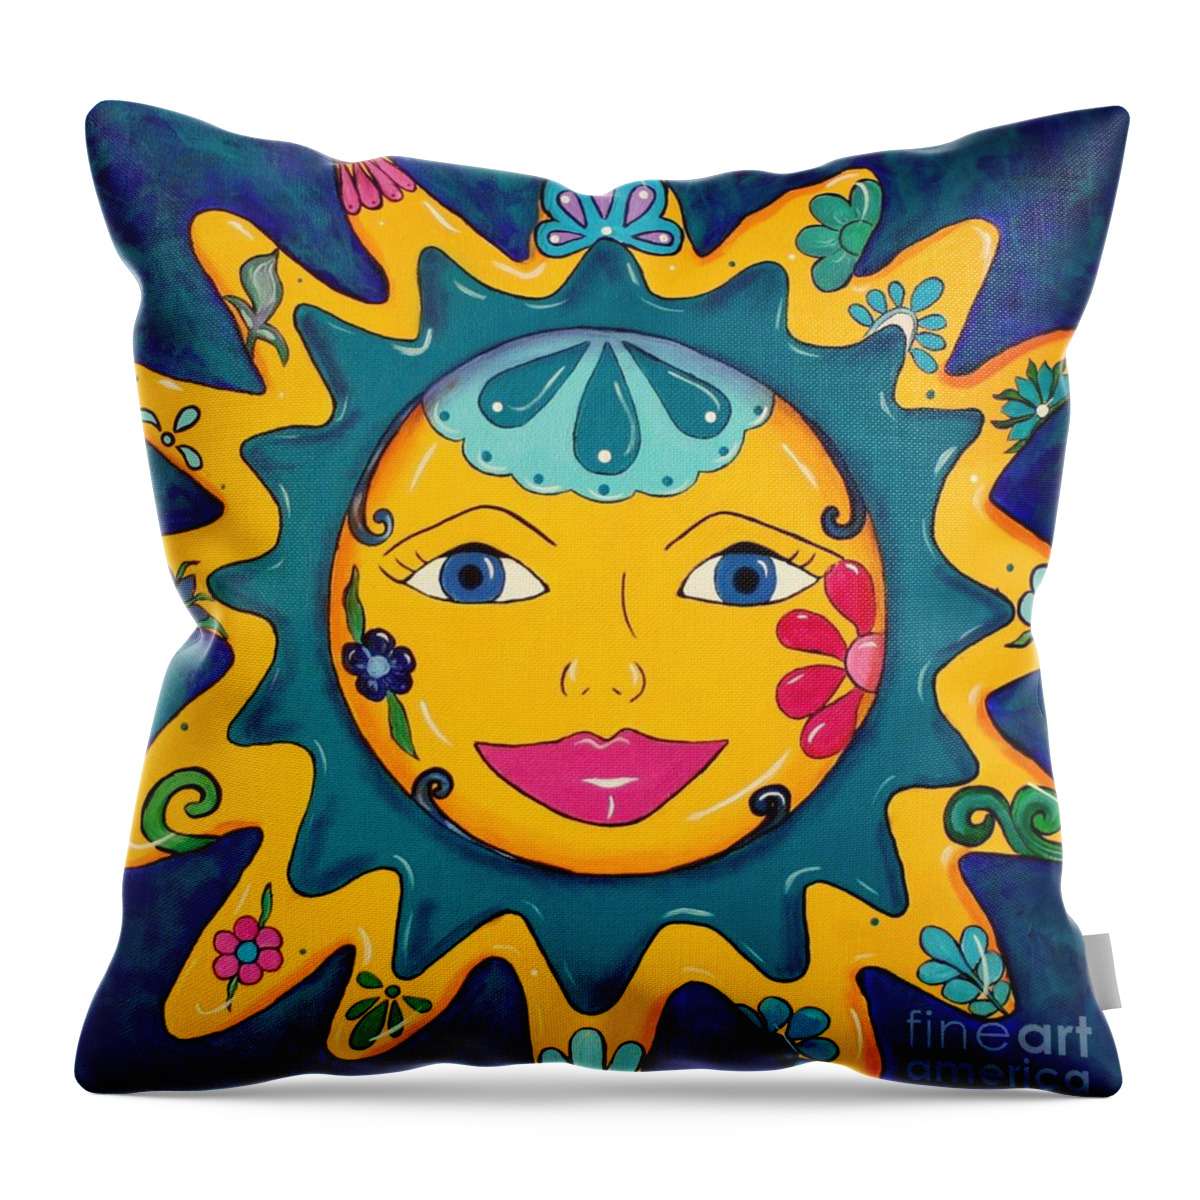 Sun Throw Pillow featuring the painting Sun by Melinda Etzold